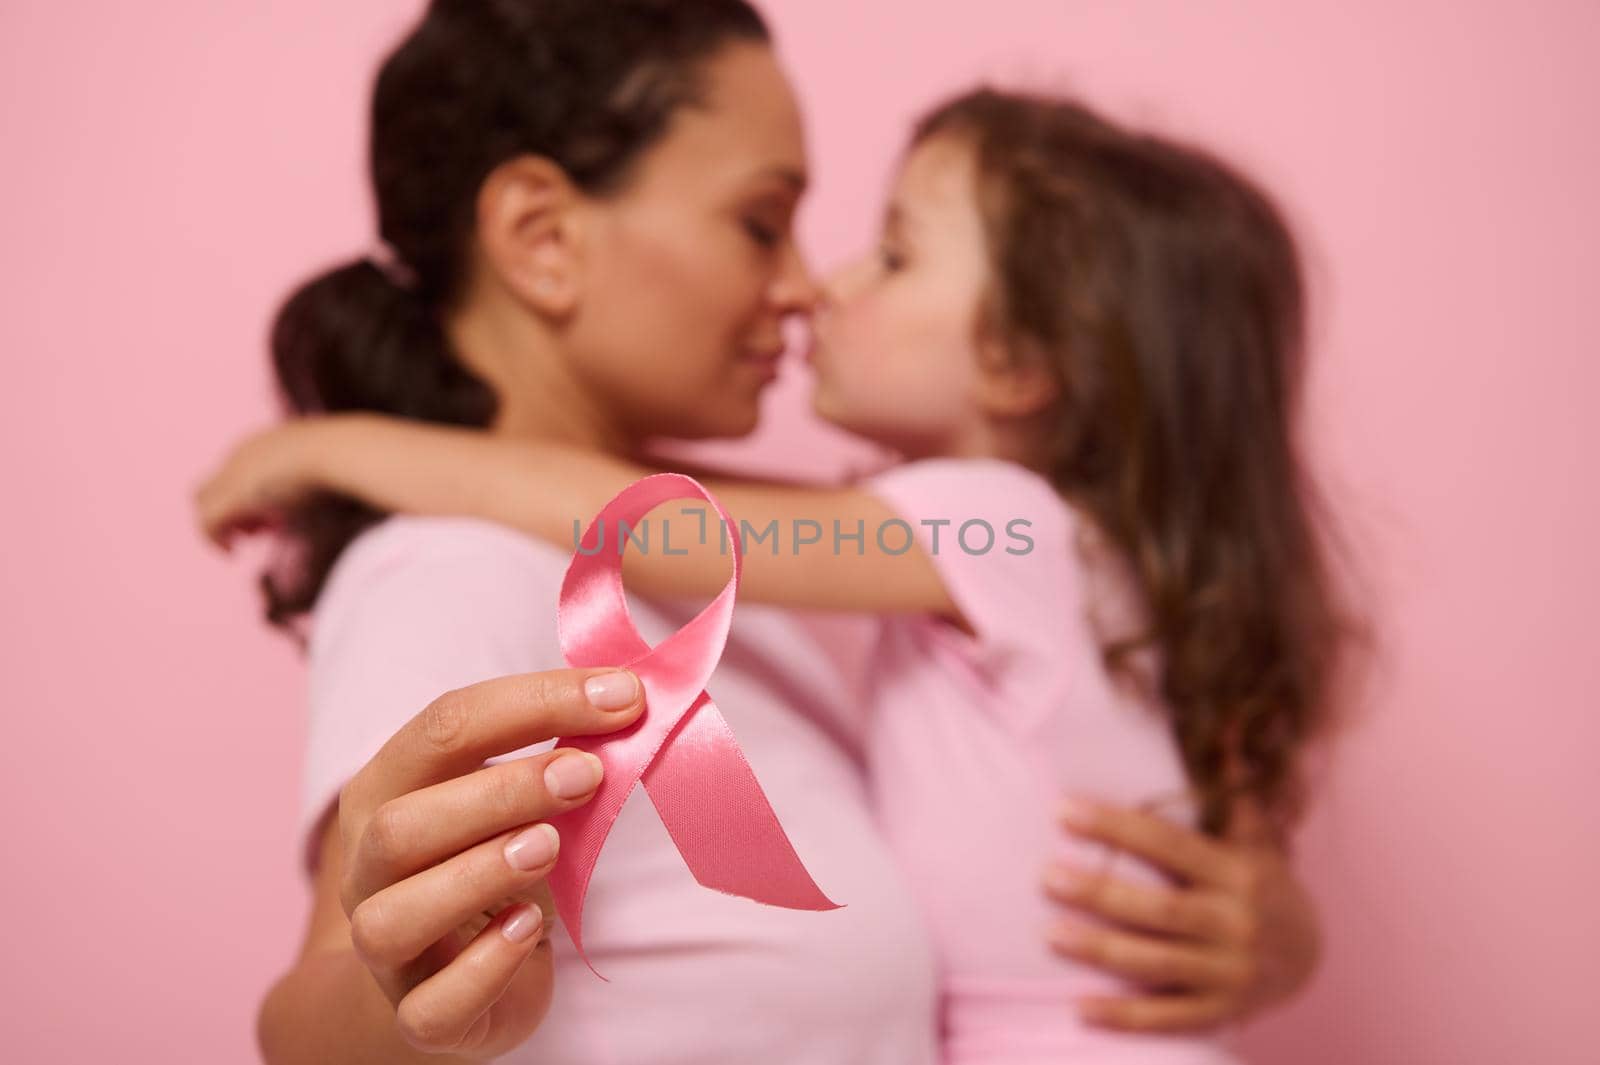 Soft focus on pink satin ribbon, symbol of International Breast Cancer Awareness Day, against blurred background of loving mother and lovely daughter. Female healthcare and medical education concept by artgf